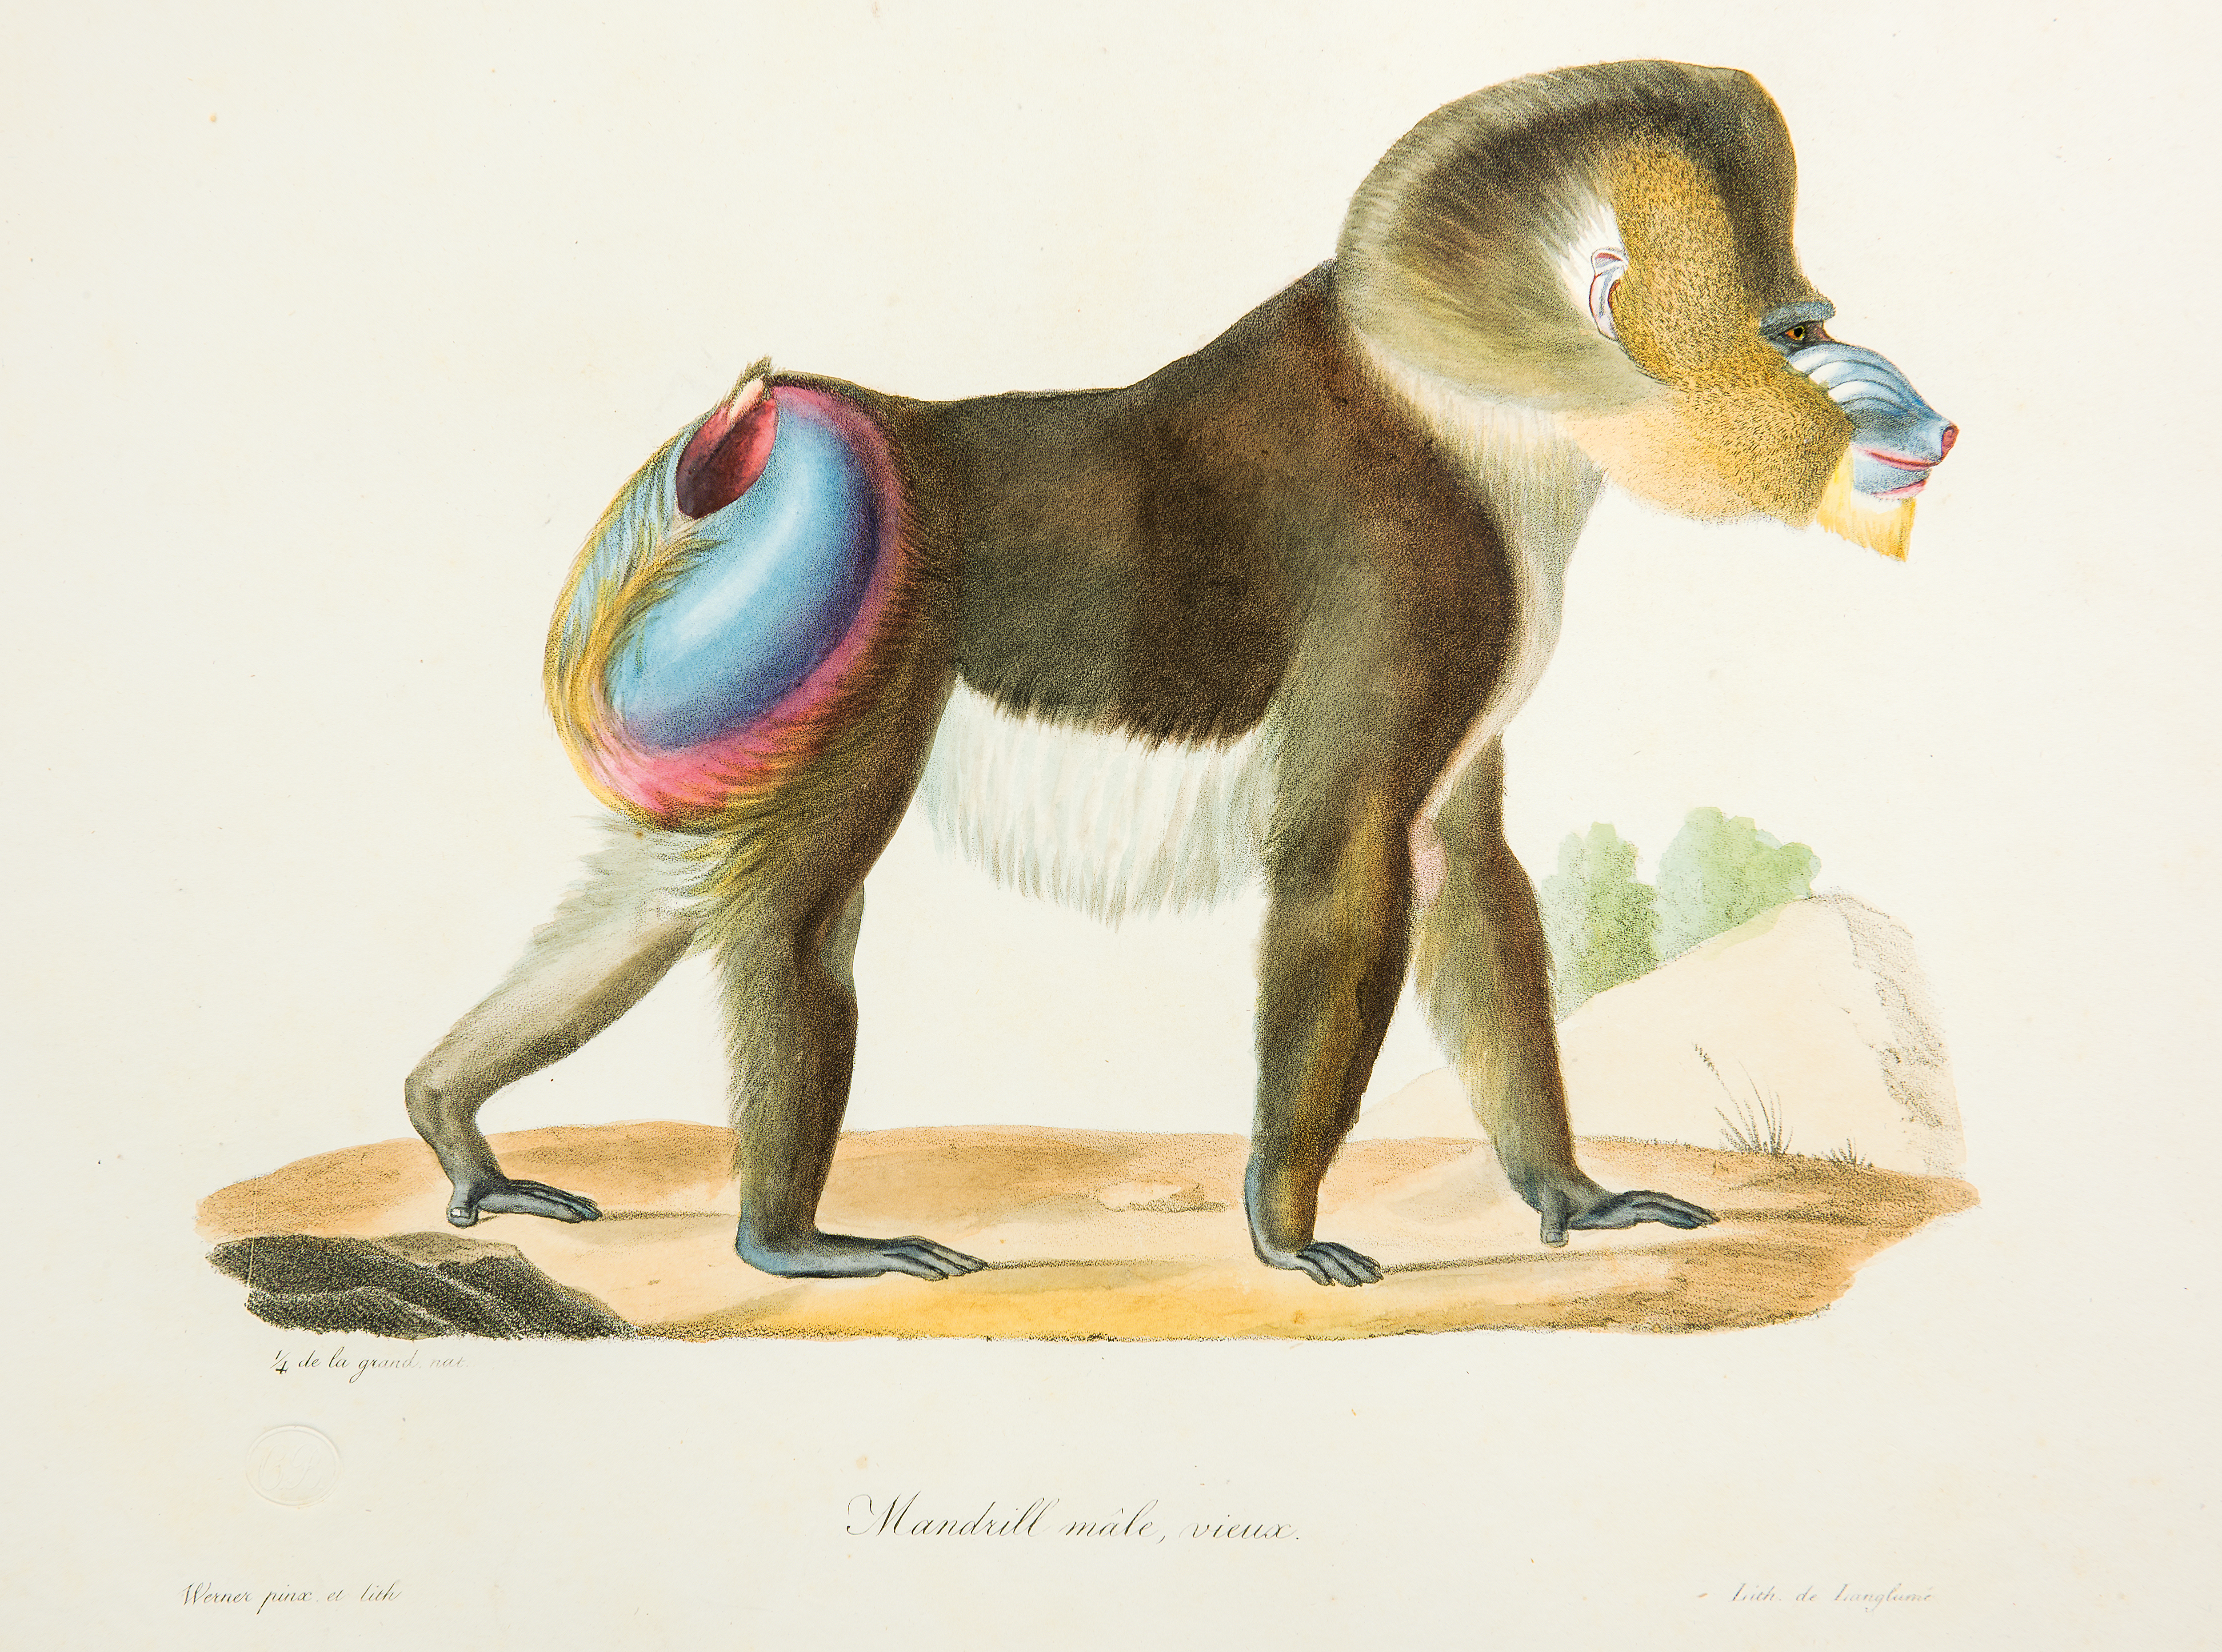 Mandrill by C.P. Lasteyrie ner de Saillant after Jean-Charles Werner - 1822–1829 